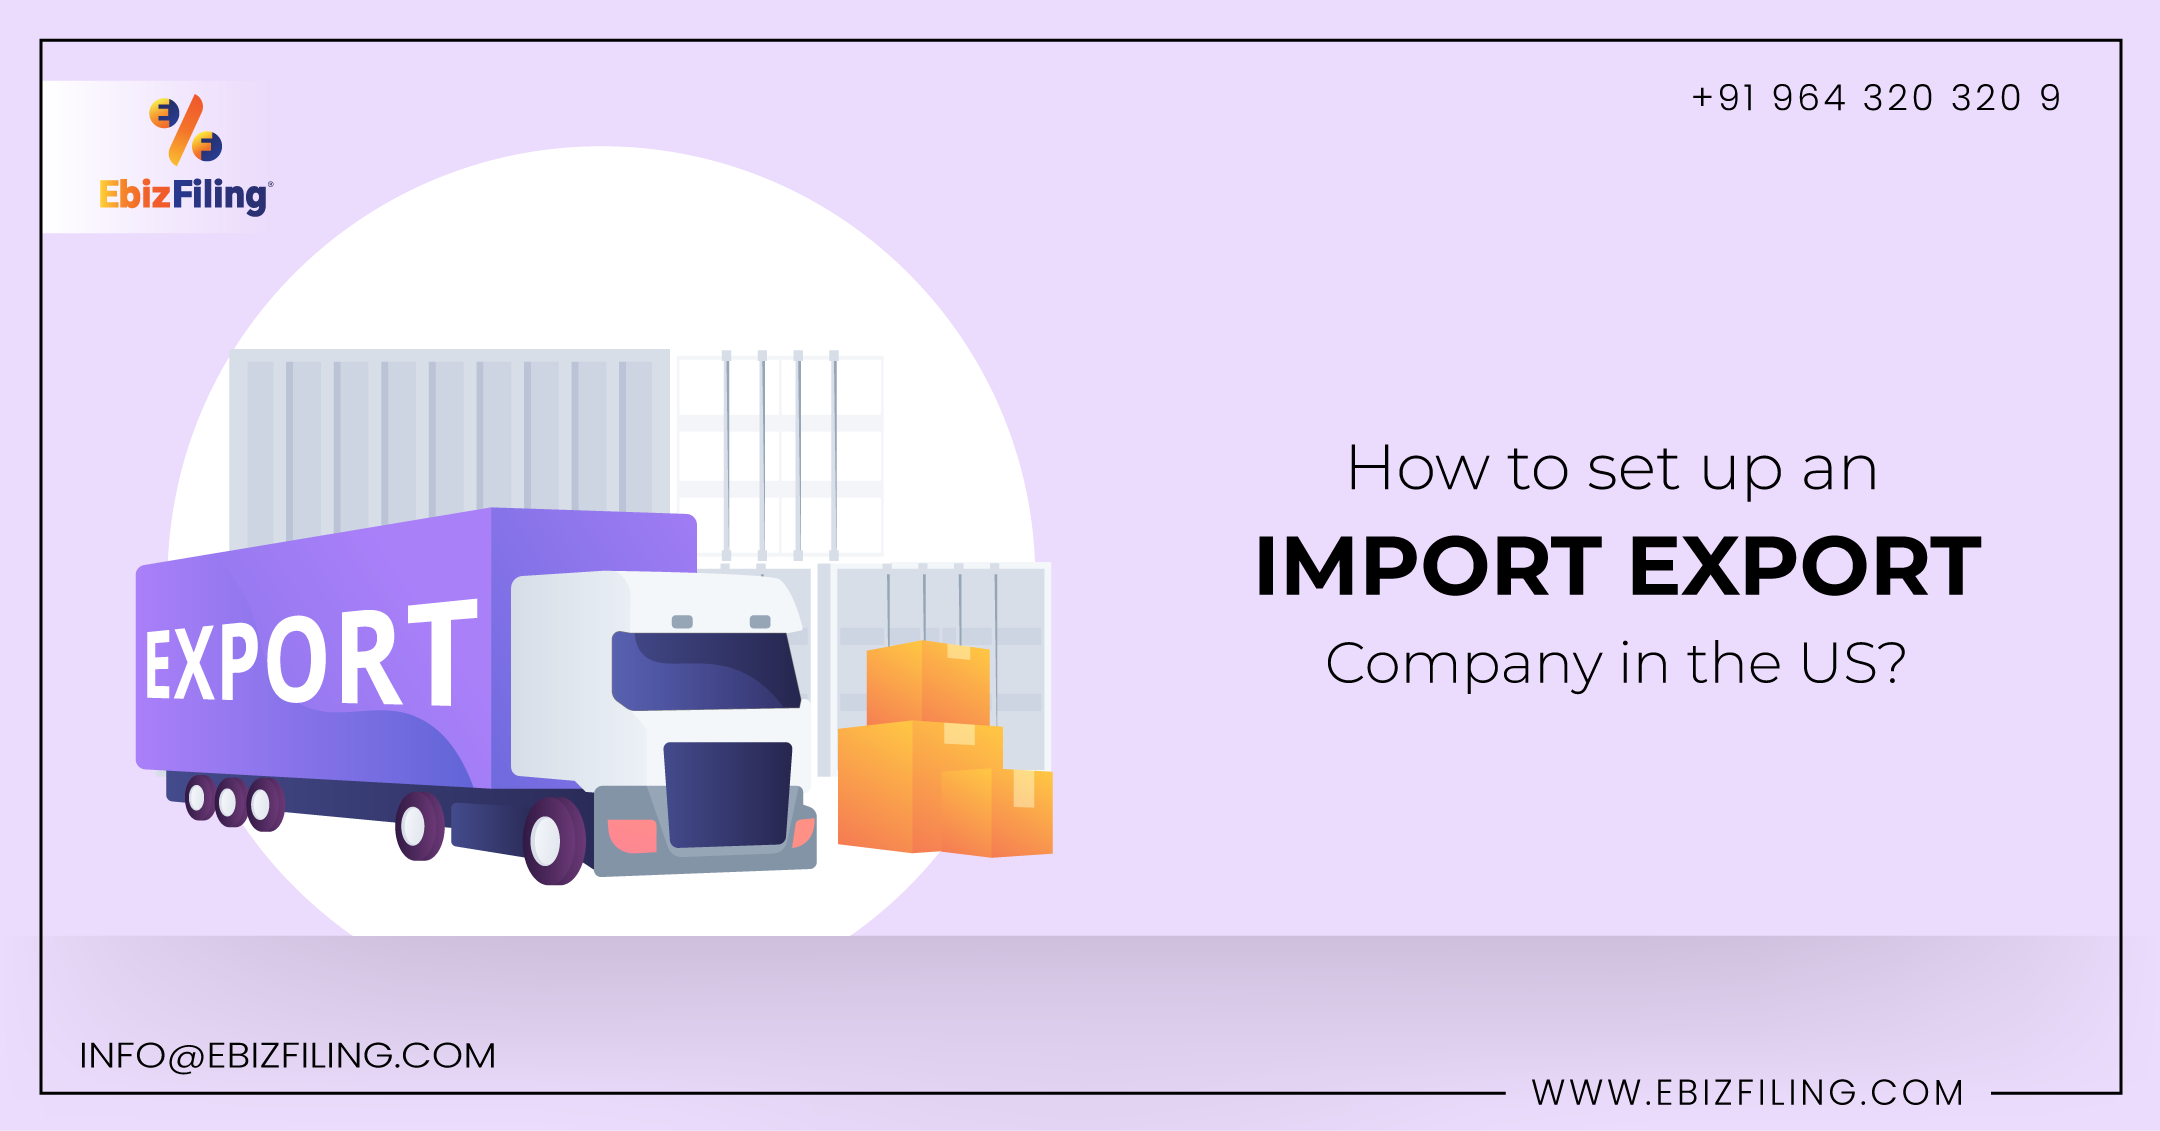 A Process on "How to start Import Export Business in the US?" | Ebizfiling